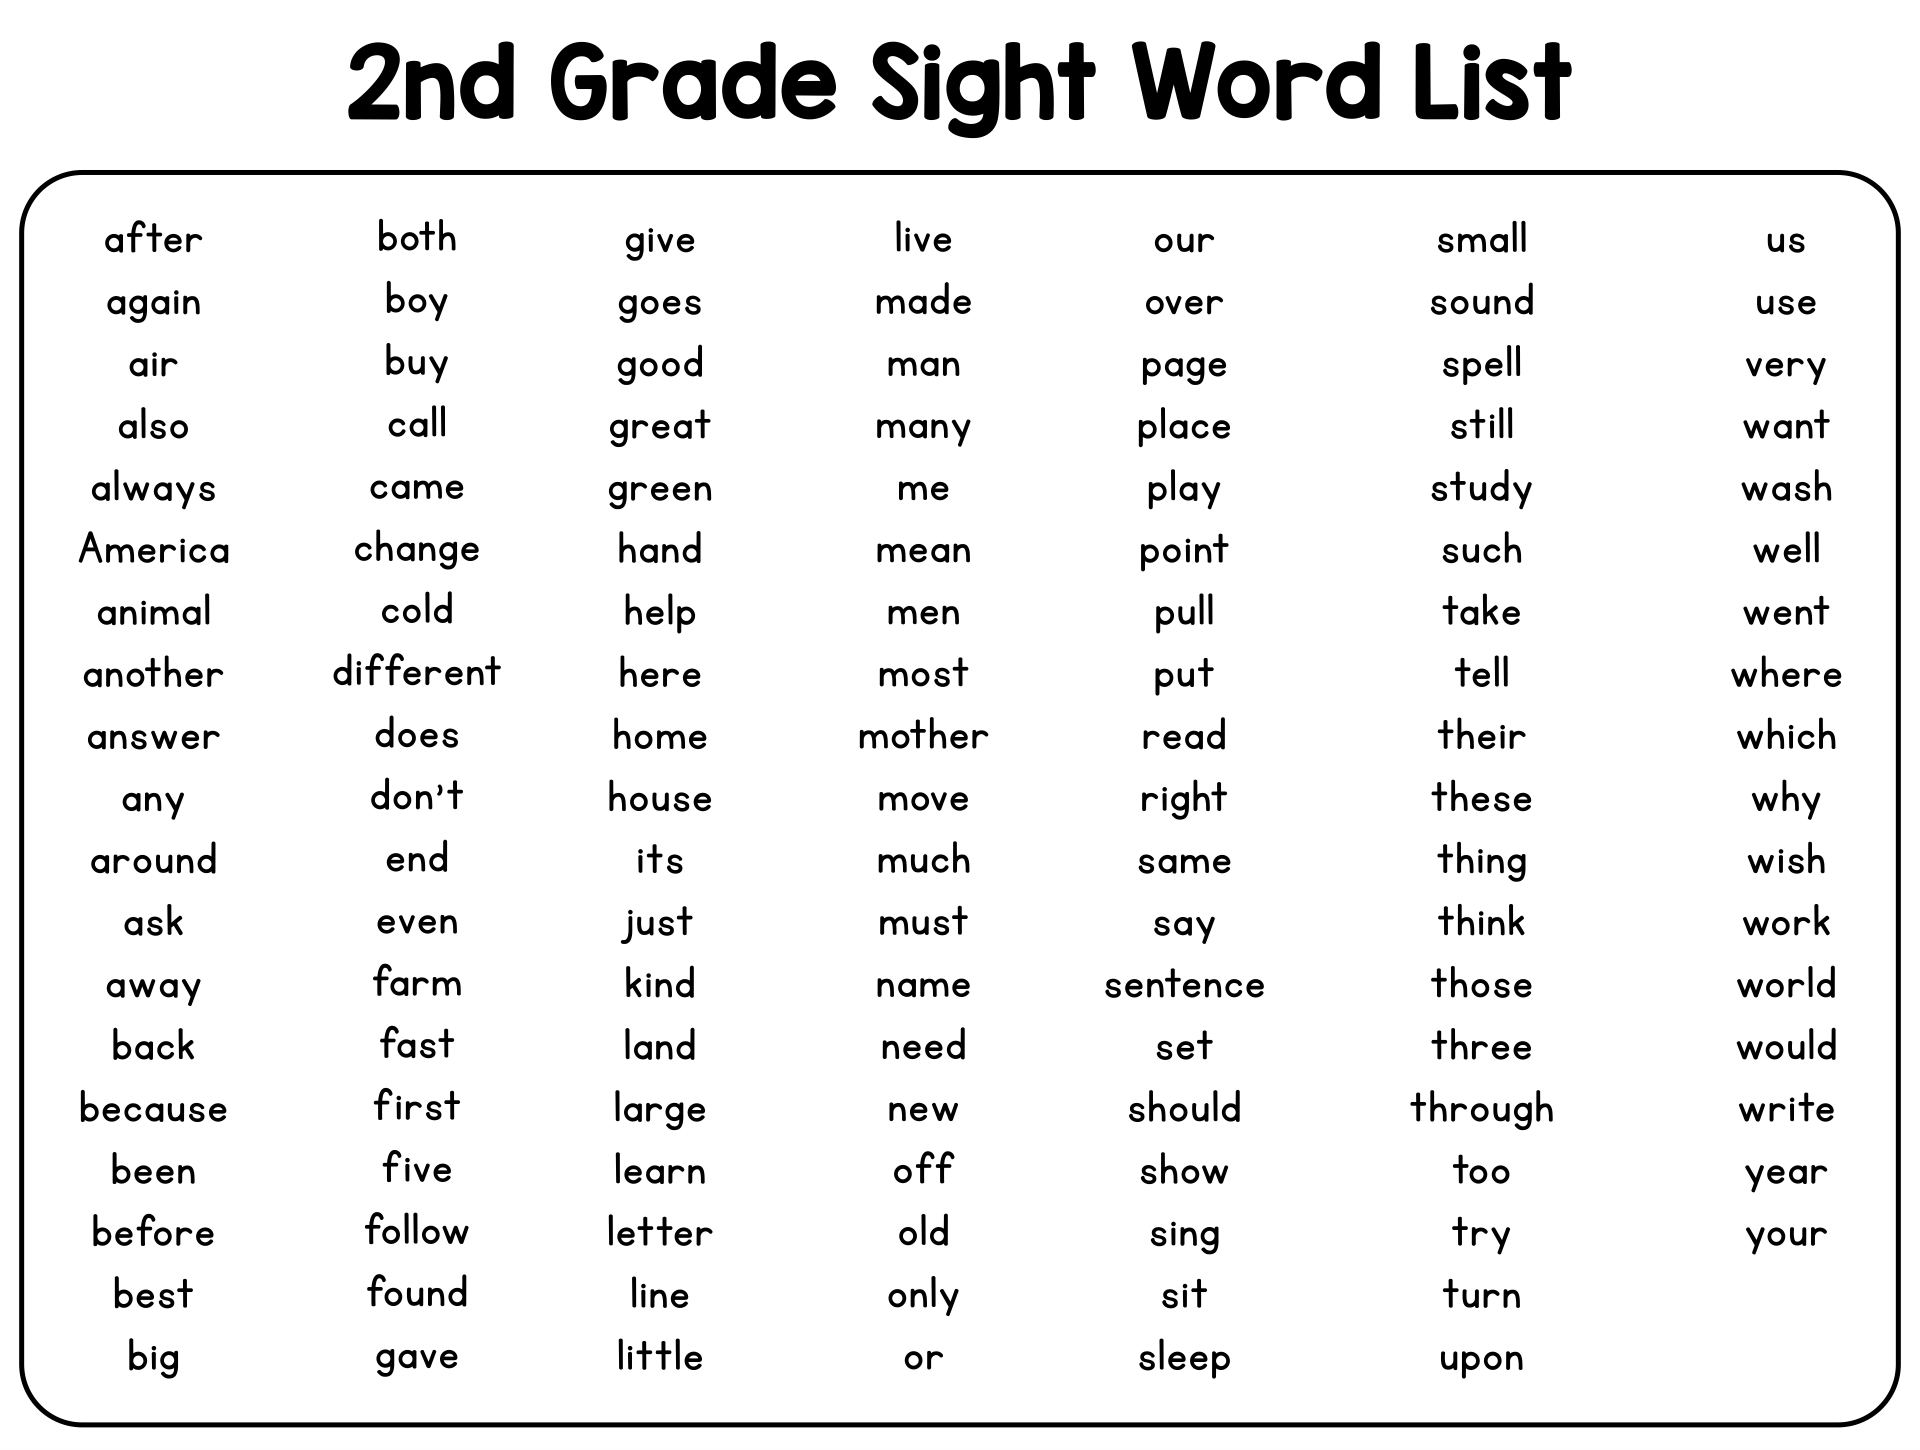 5 Best Images of Second Grade Sight Words Printable 2nd